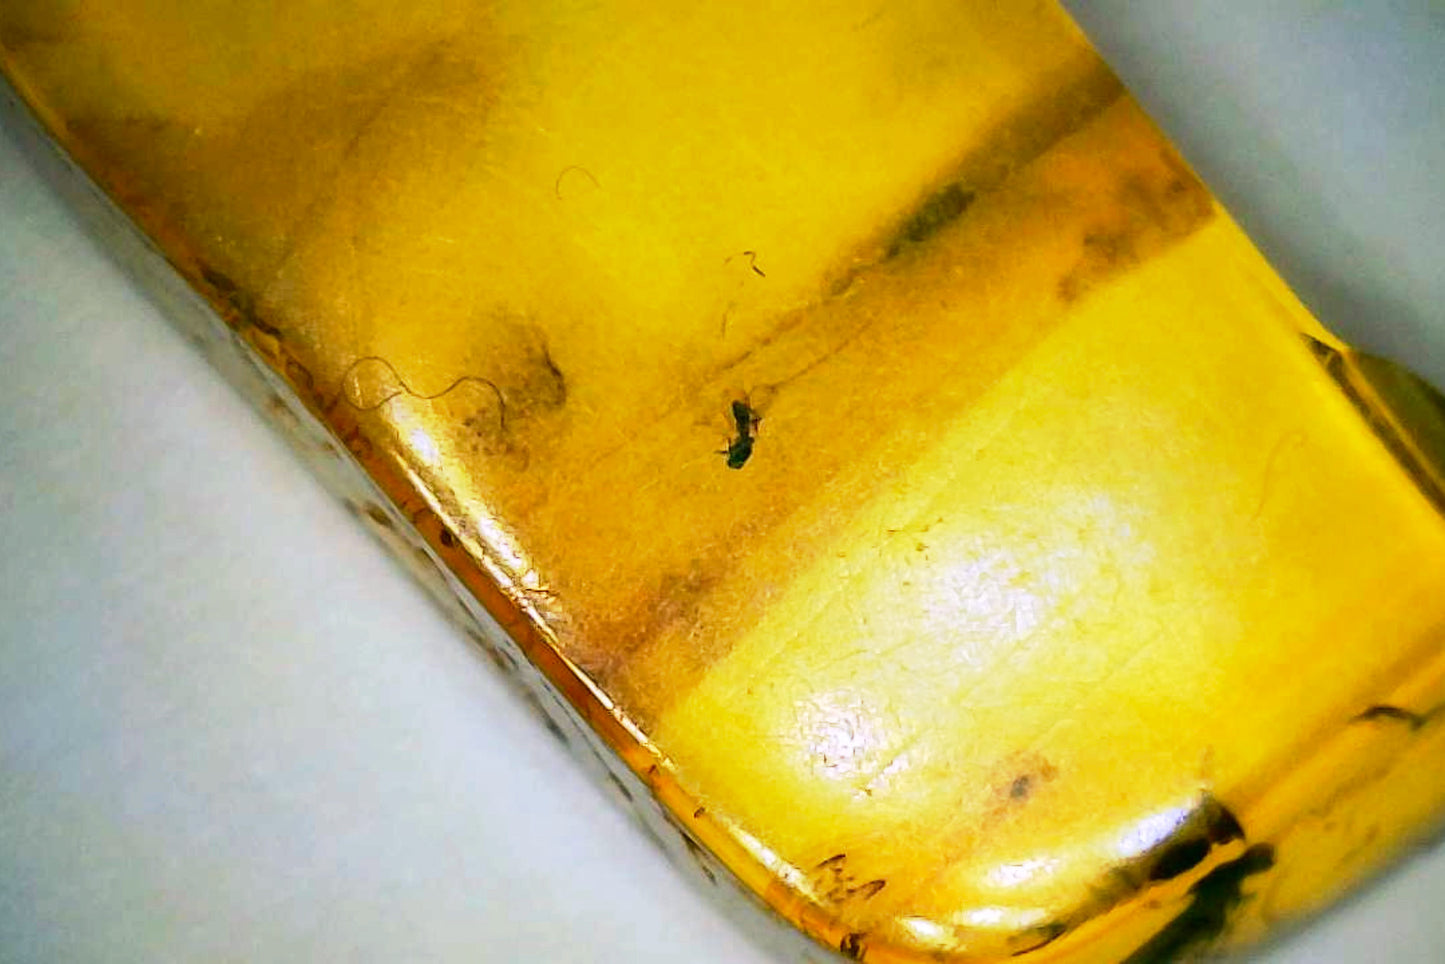 Baltic Amber E with Insect Inclusions